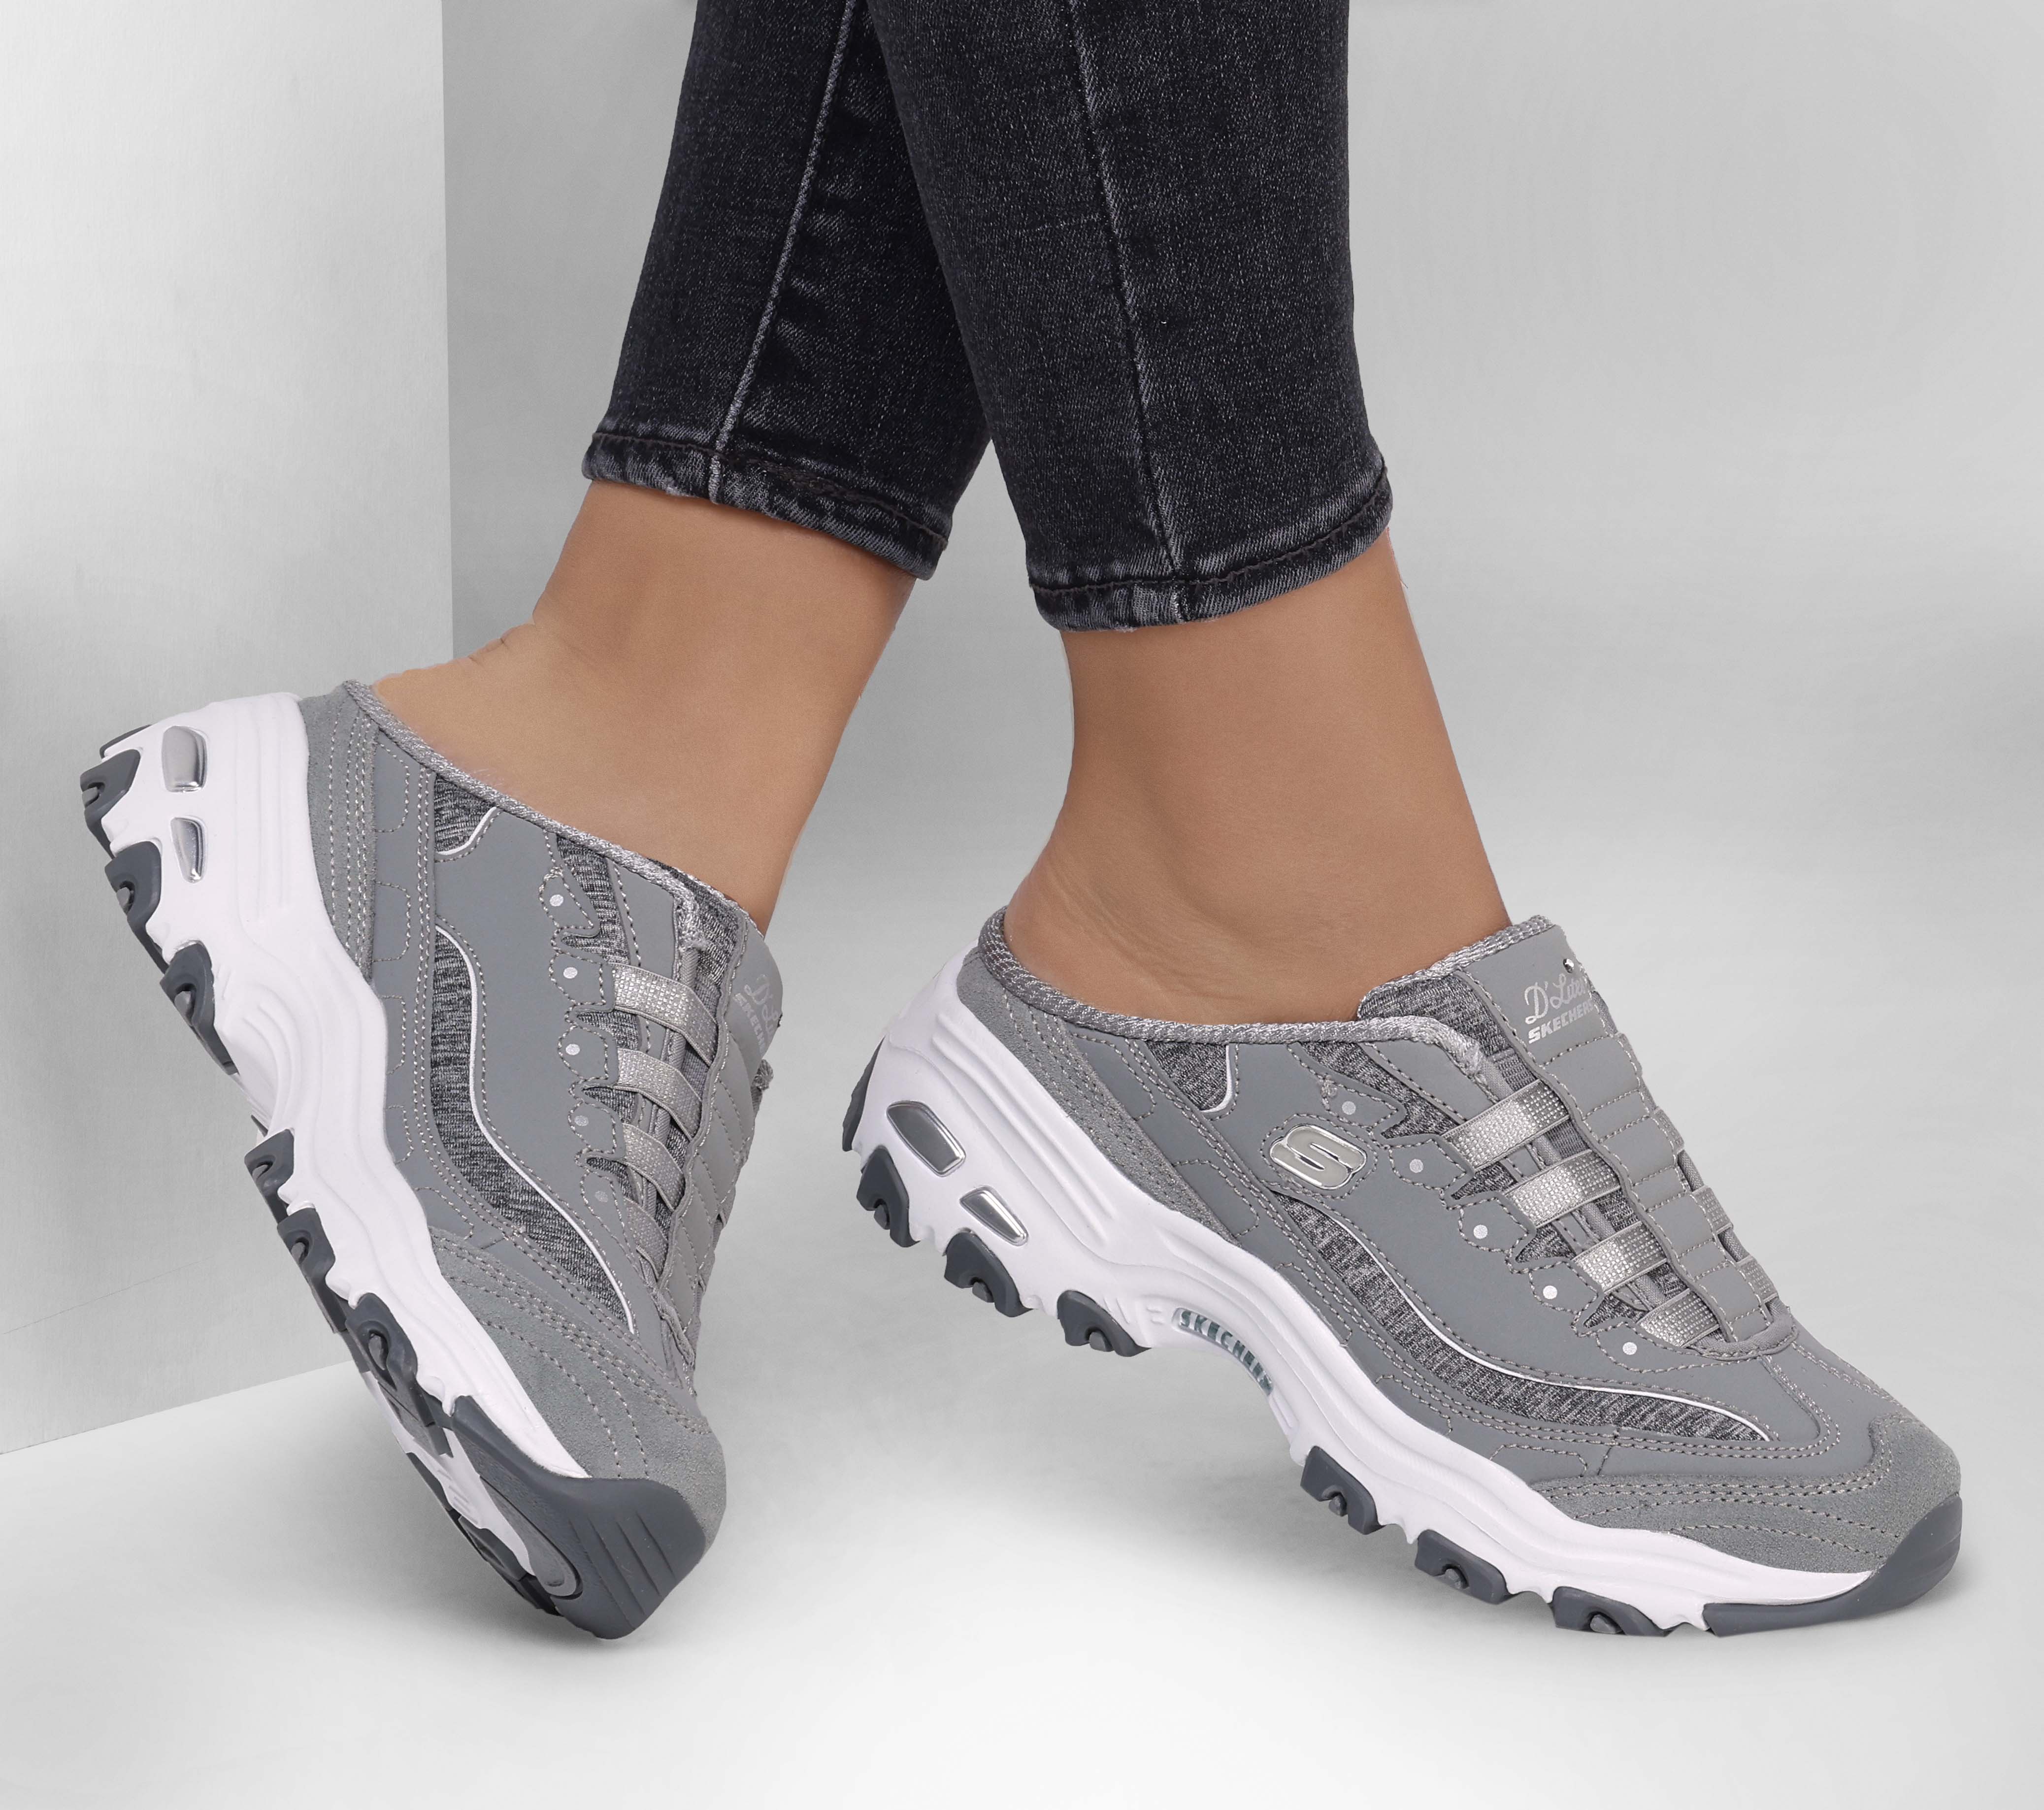 SKECHERS - Stay comfortable and stylish in #Skechers apparel